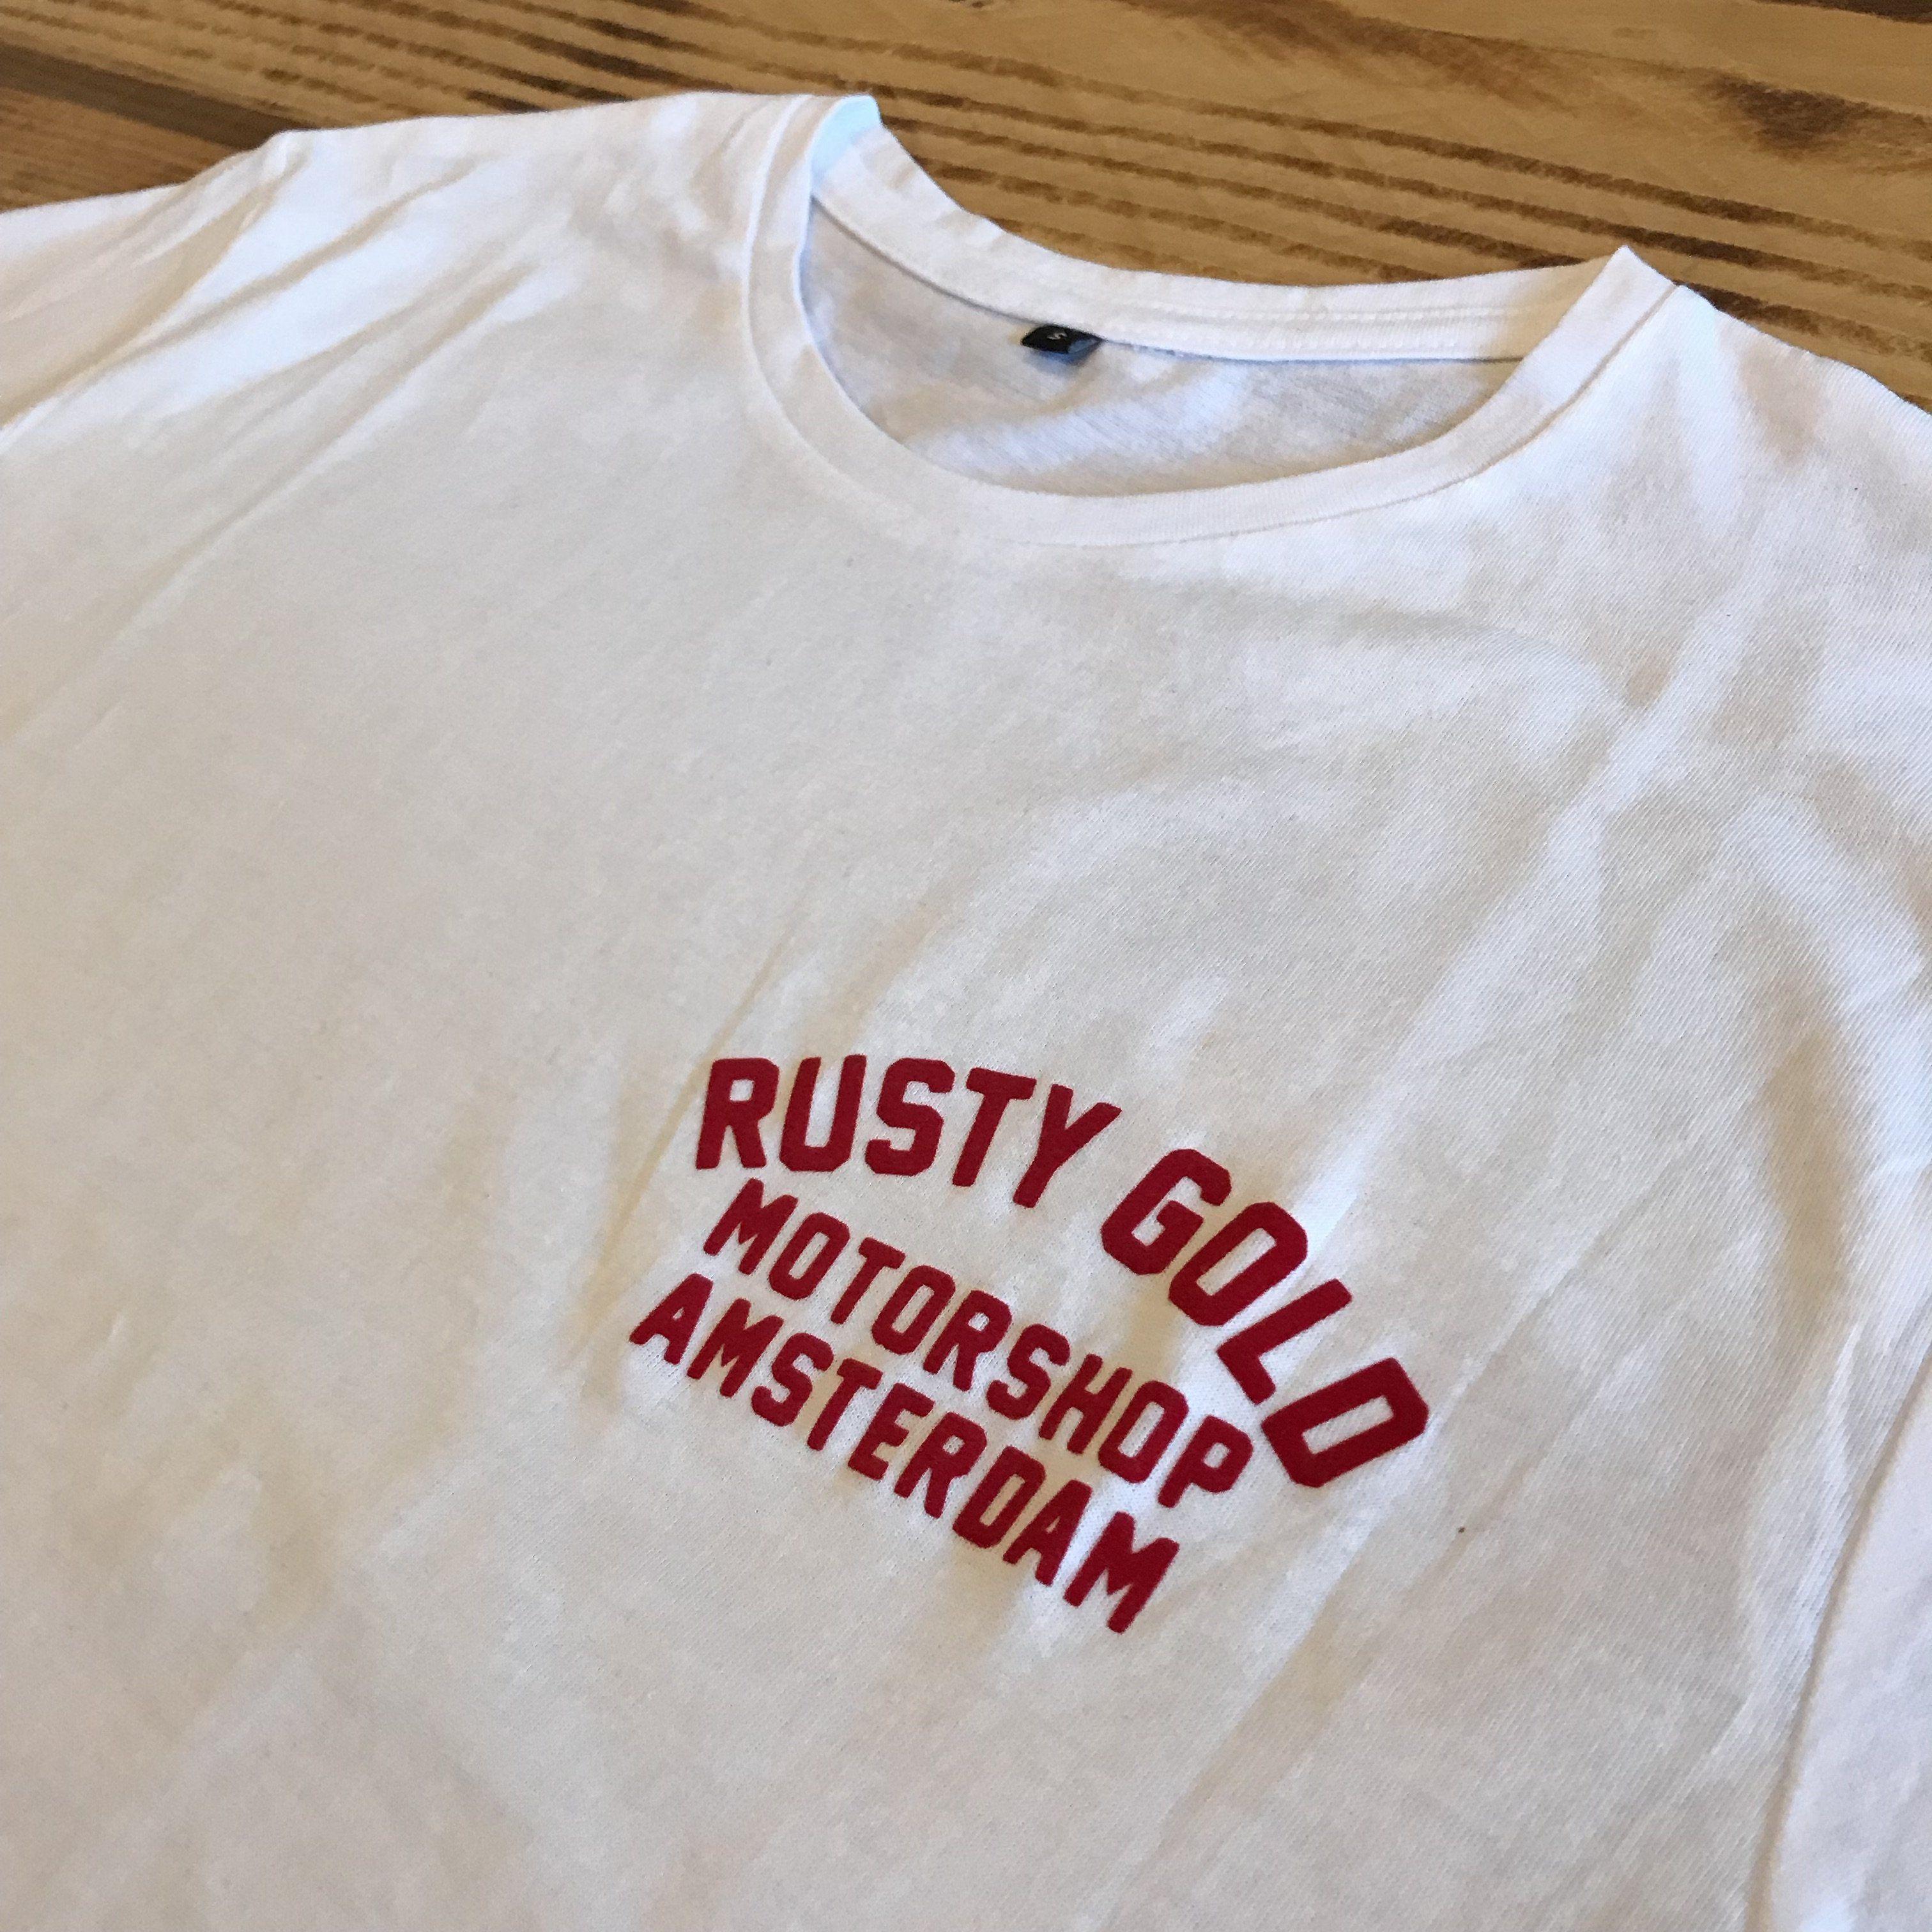 Red and White Race Logo - Rusty Race logo tee White Red - Rusty Gold Motorshop